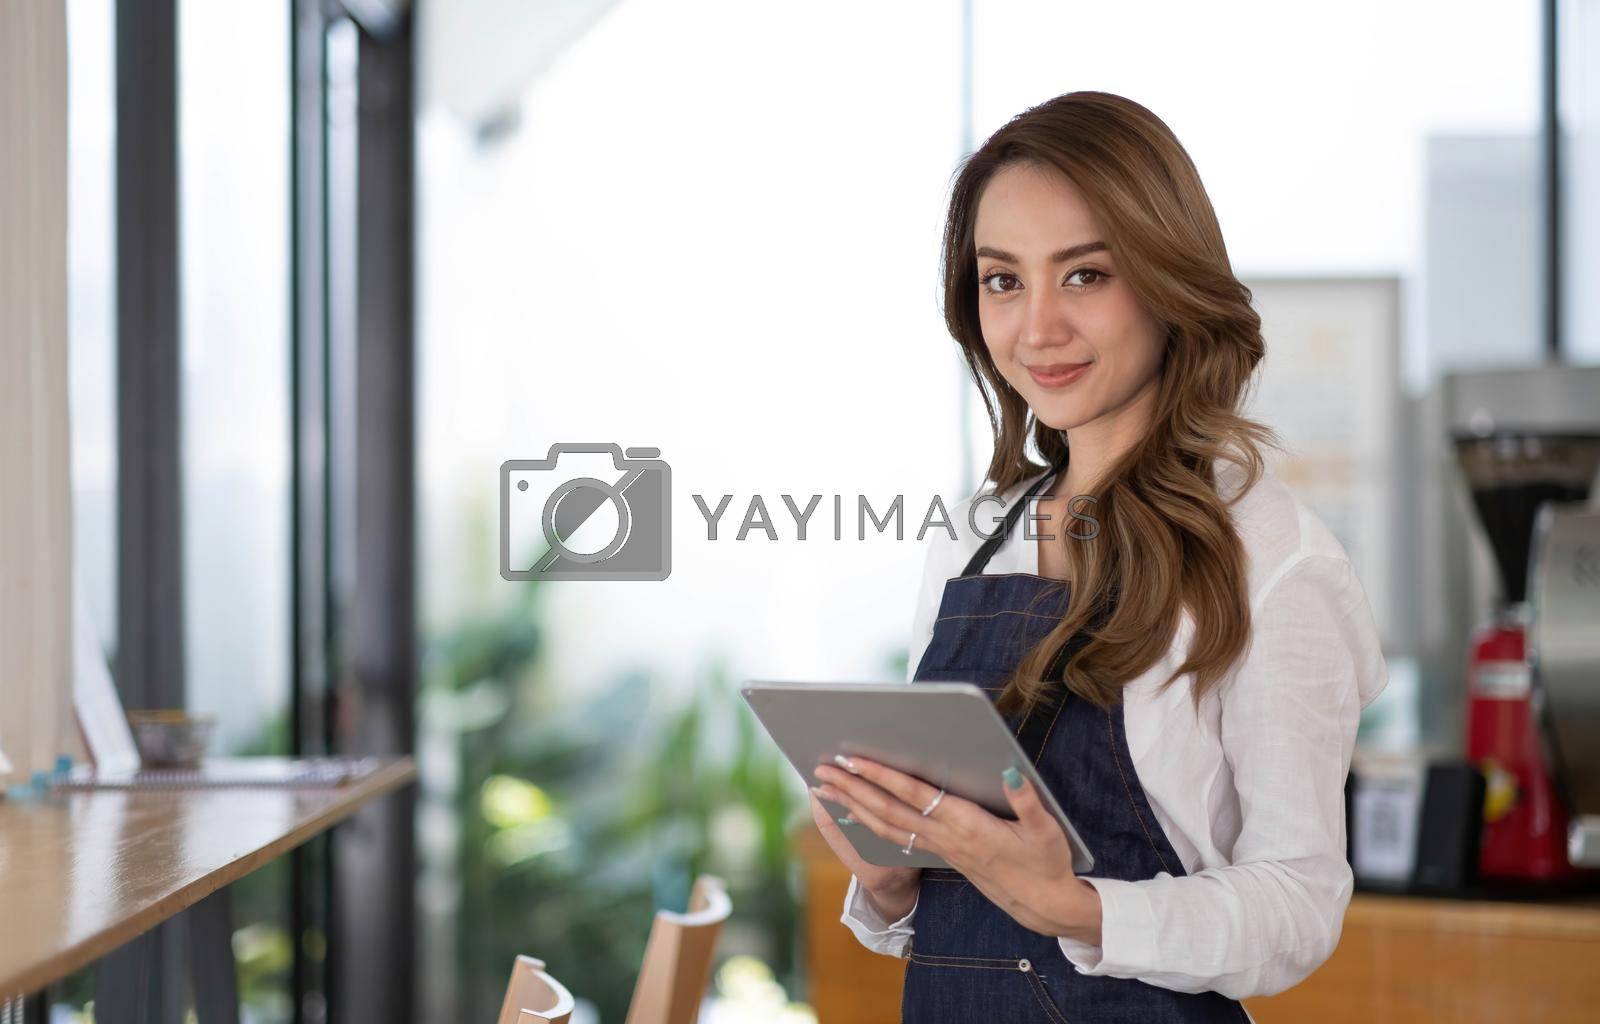 Royalty free image of Startup successful small business owner sme beauty girl stand with tablet smartphone in coffee shop restaurant. Portrait of asian tan woman barista cafe owner. SME entrepreneur seller business concept by wichayada